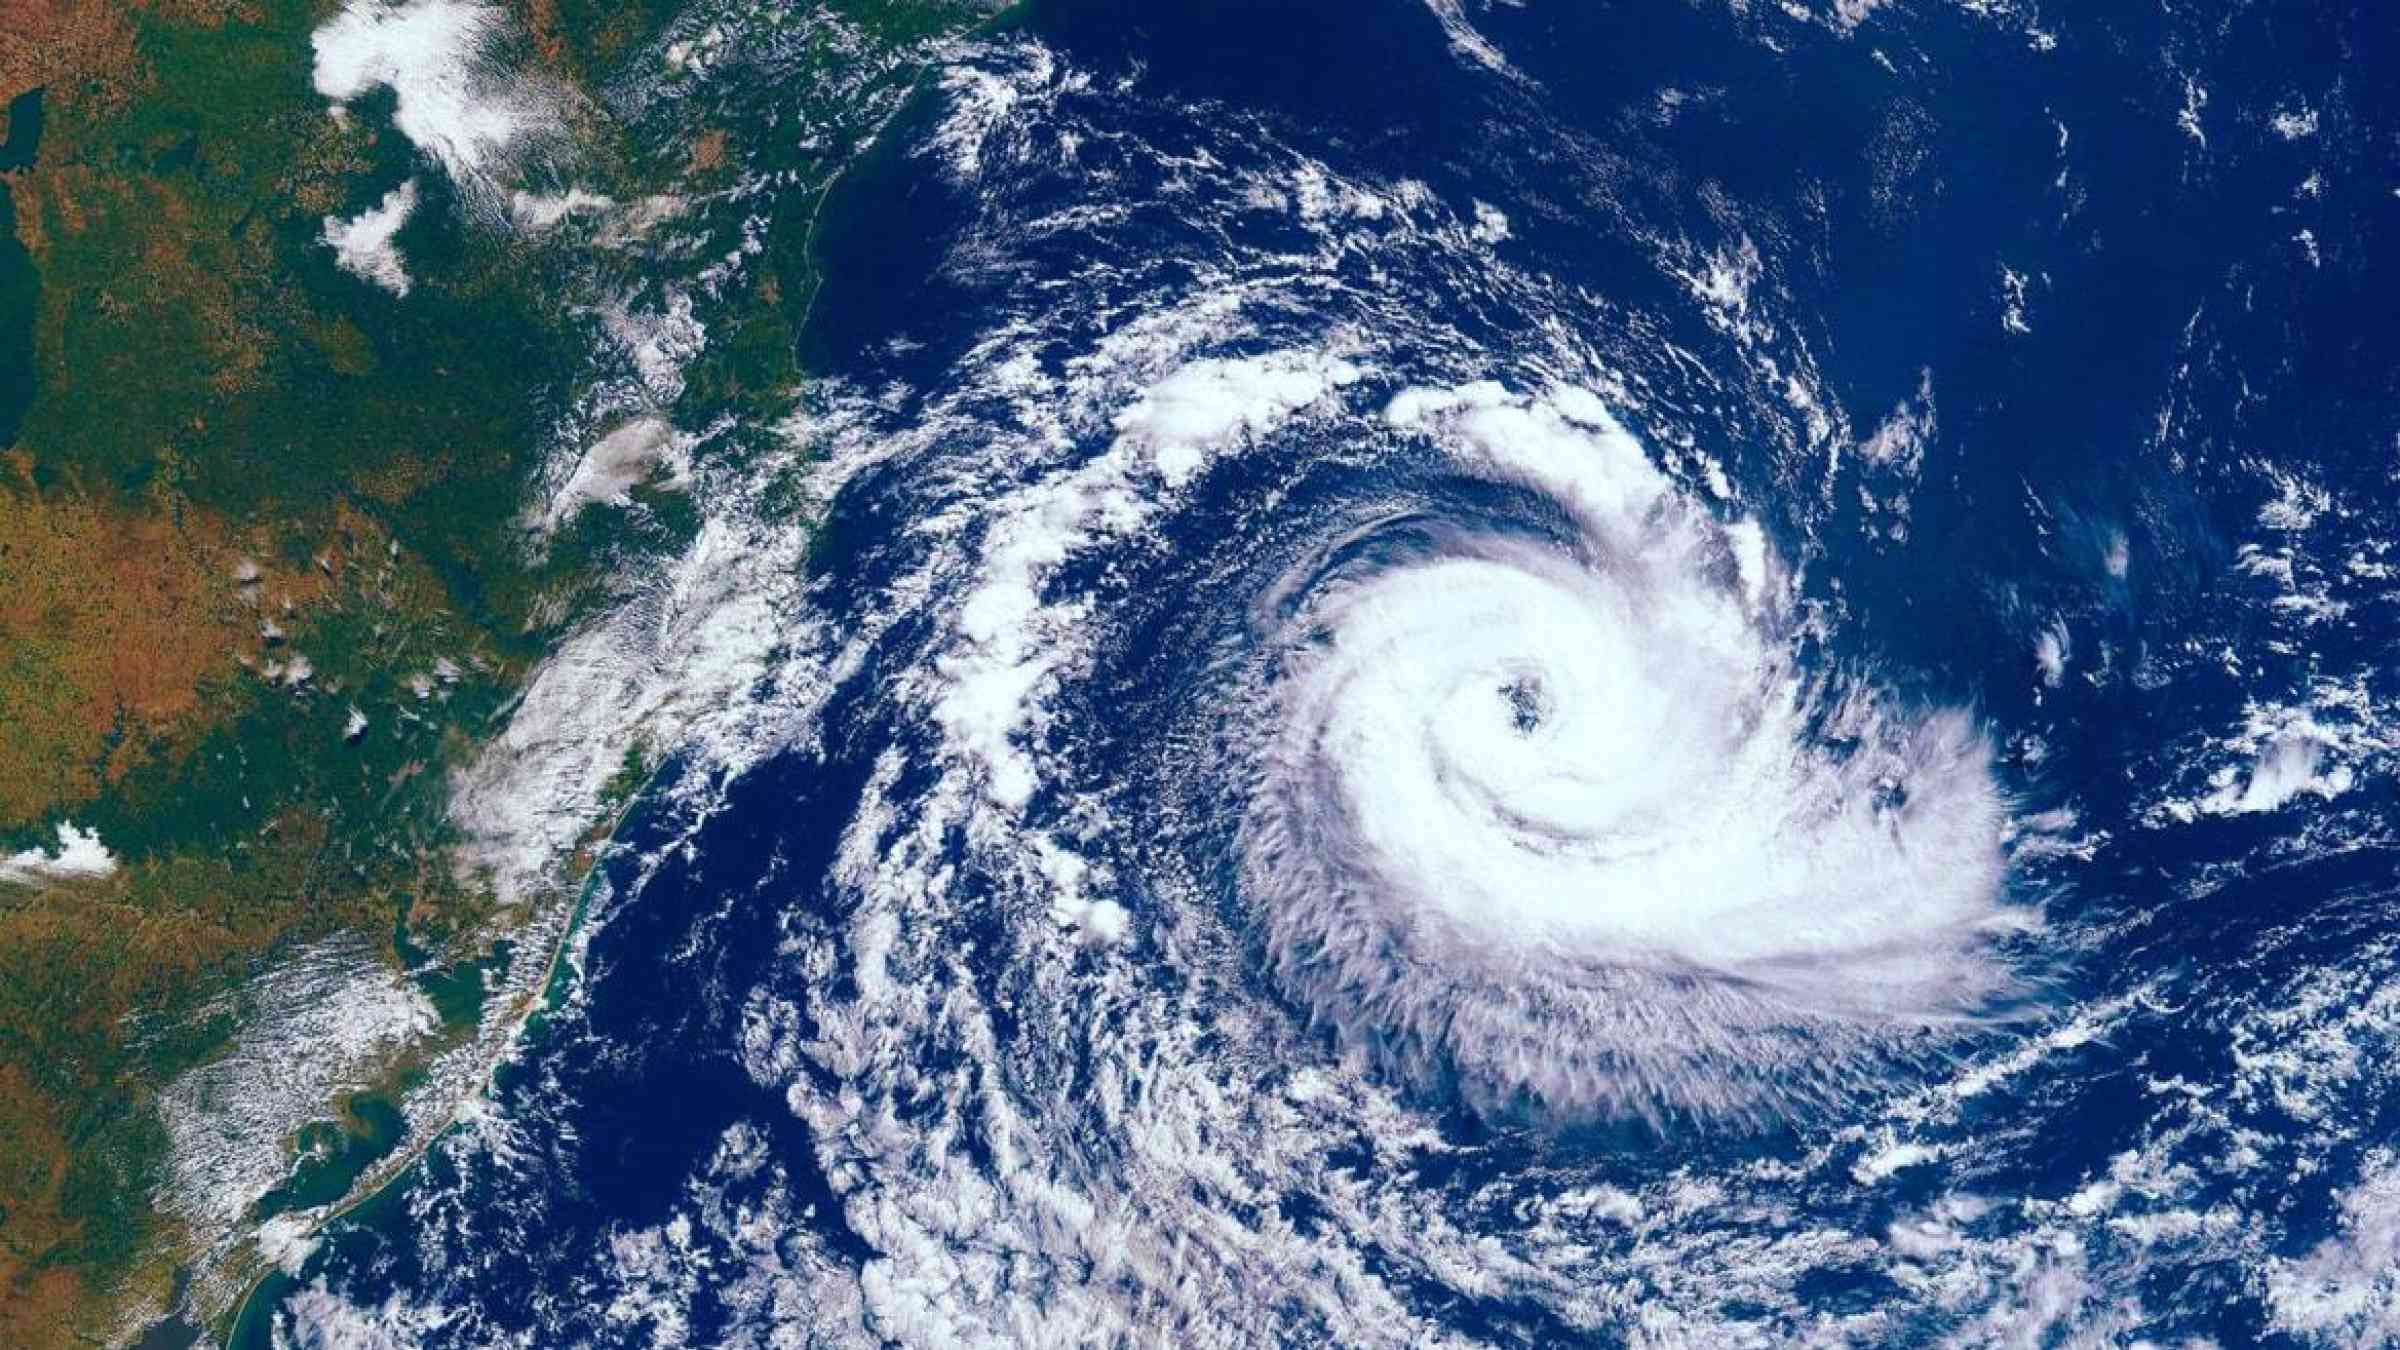 This image shows a class 5 Super Taifun approaching the Asian Pacific coast. The image shows the eye of the hurricane viewed from space.